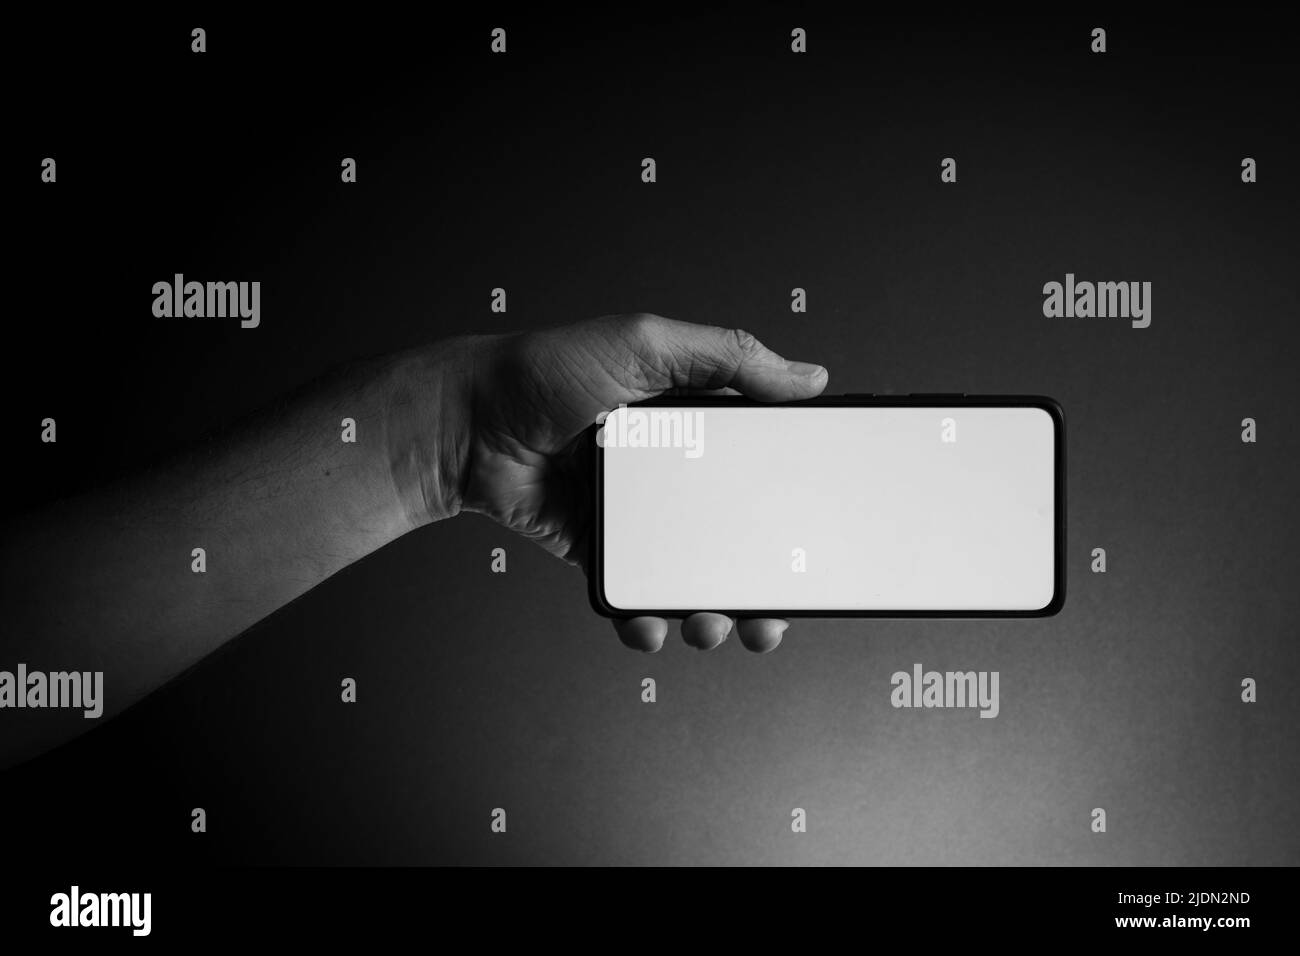 Black and white image of man's hand holding black smartphone horizontally with blank white screen isolated on dark background with dramatic lighting Stock Photo